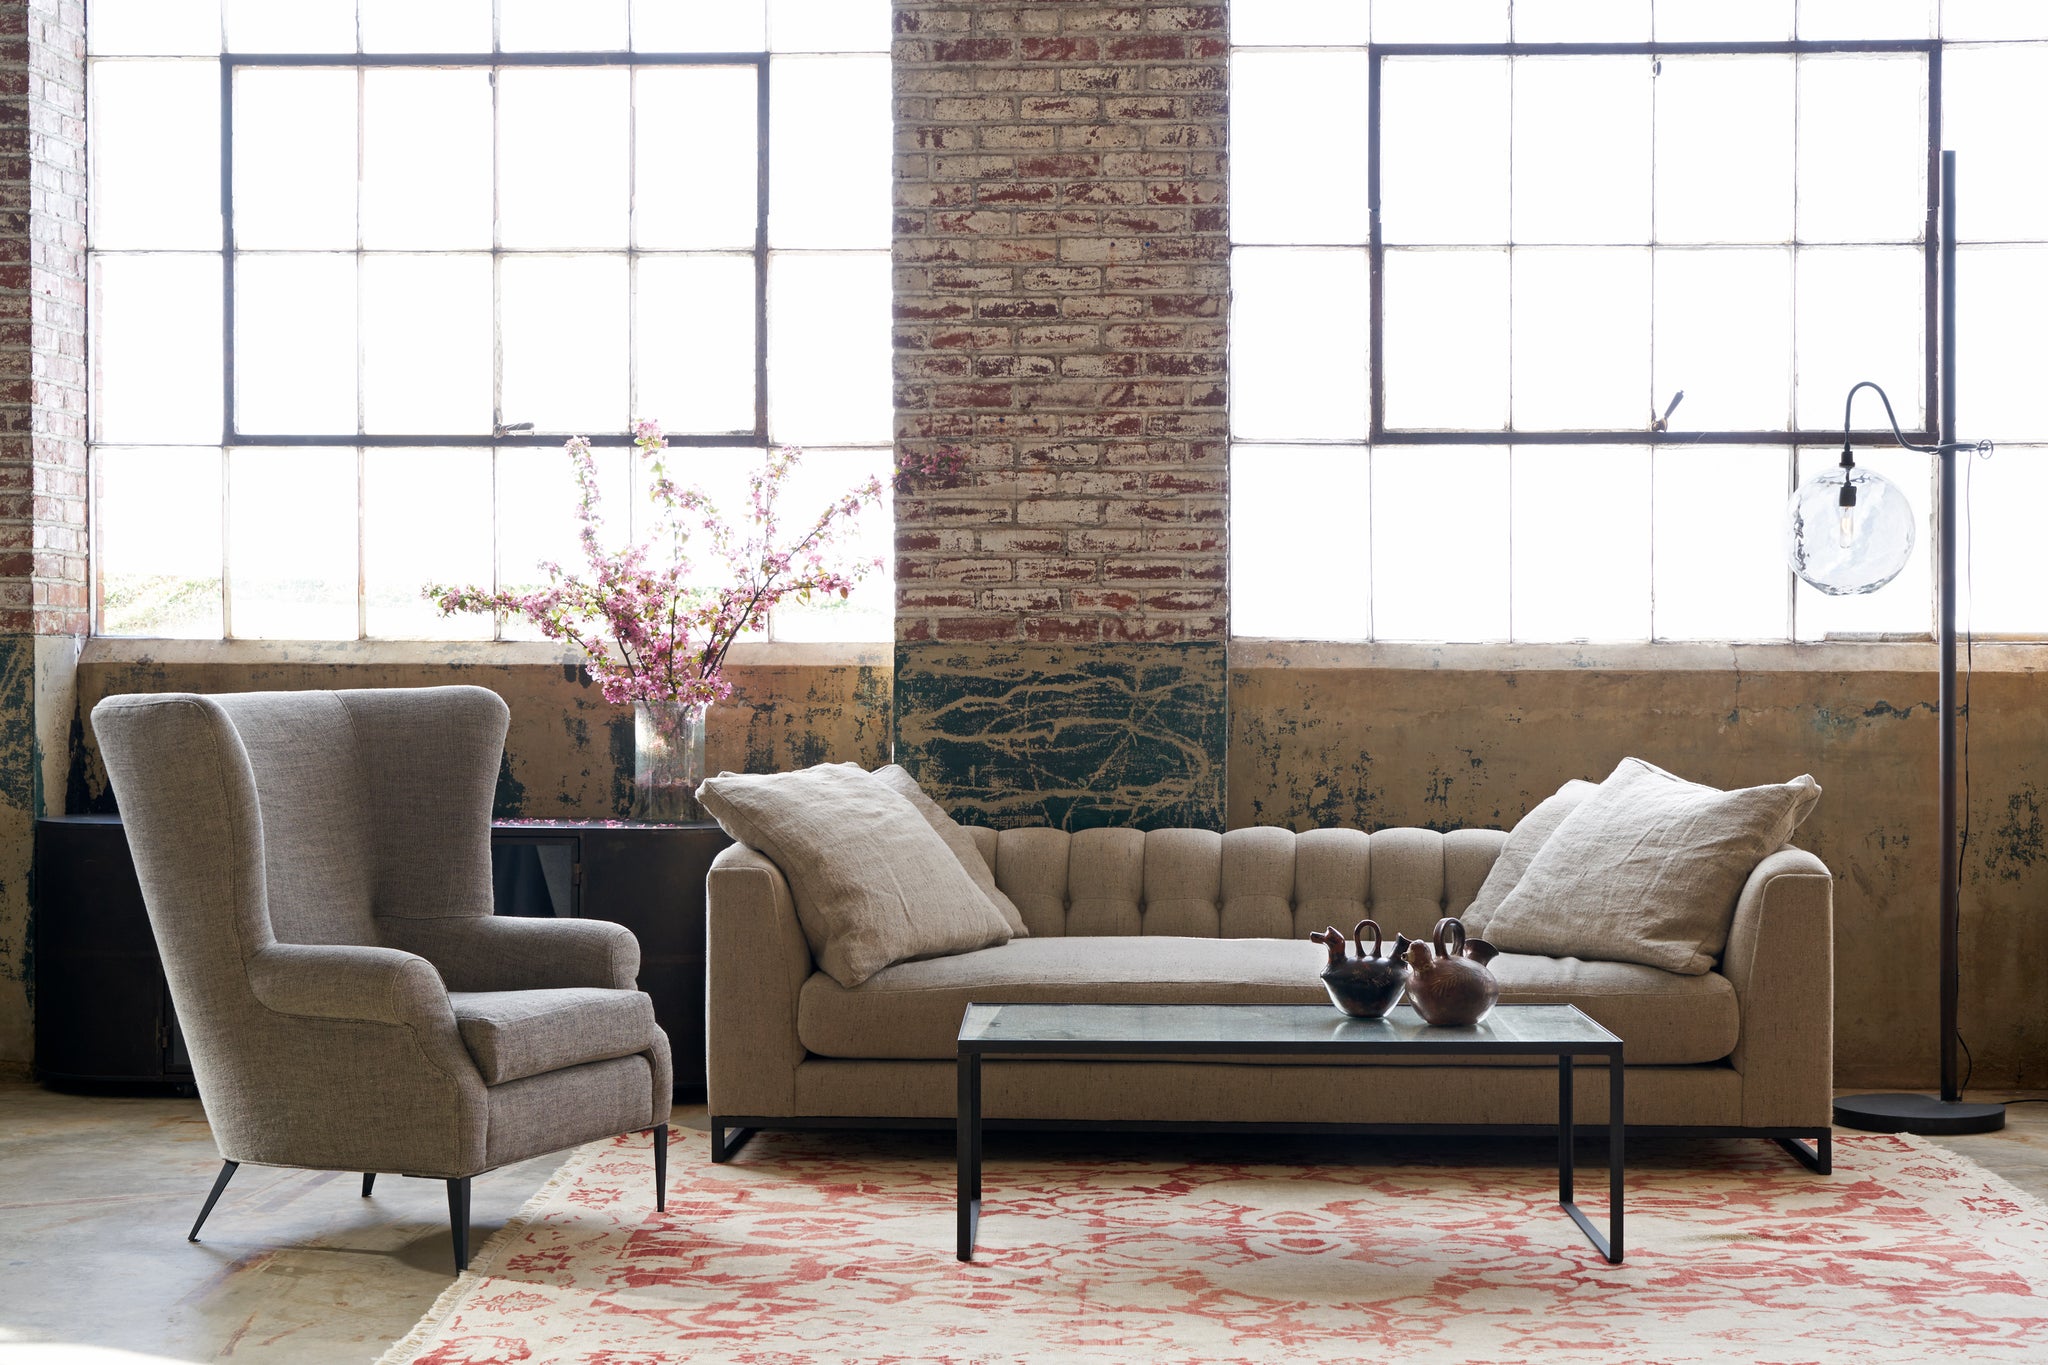  Sofa with 4 pillows in front of 2 large windows with a wing chair on the left. Photographed in Andrews Burlap. 